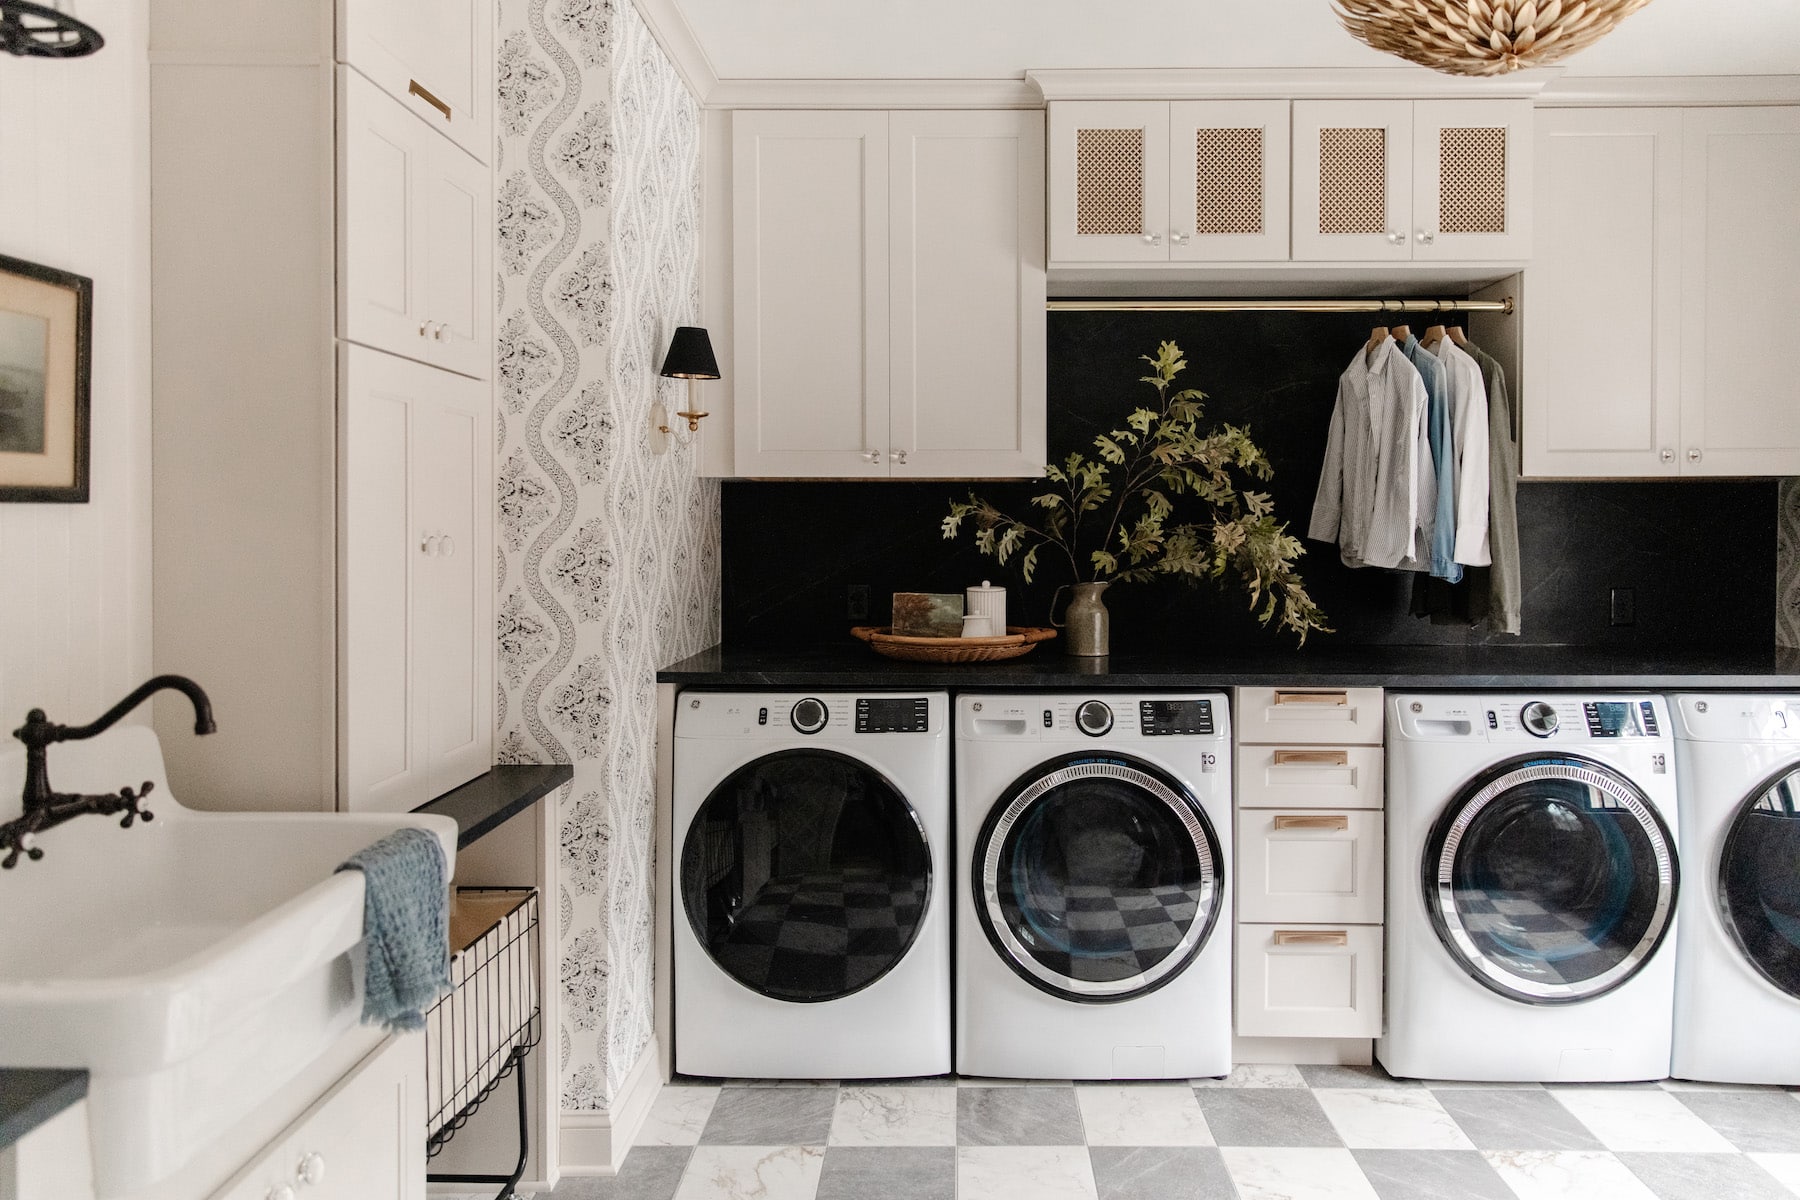 Aggregate 64+ wallpaper for laundry rooms super hot - in.coedo.com.vn